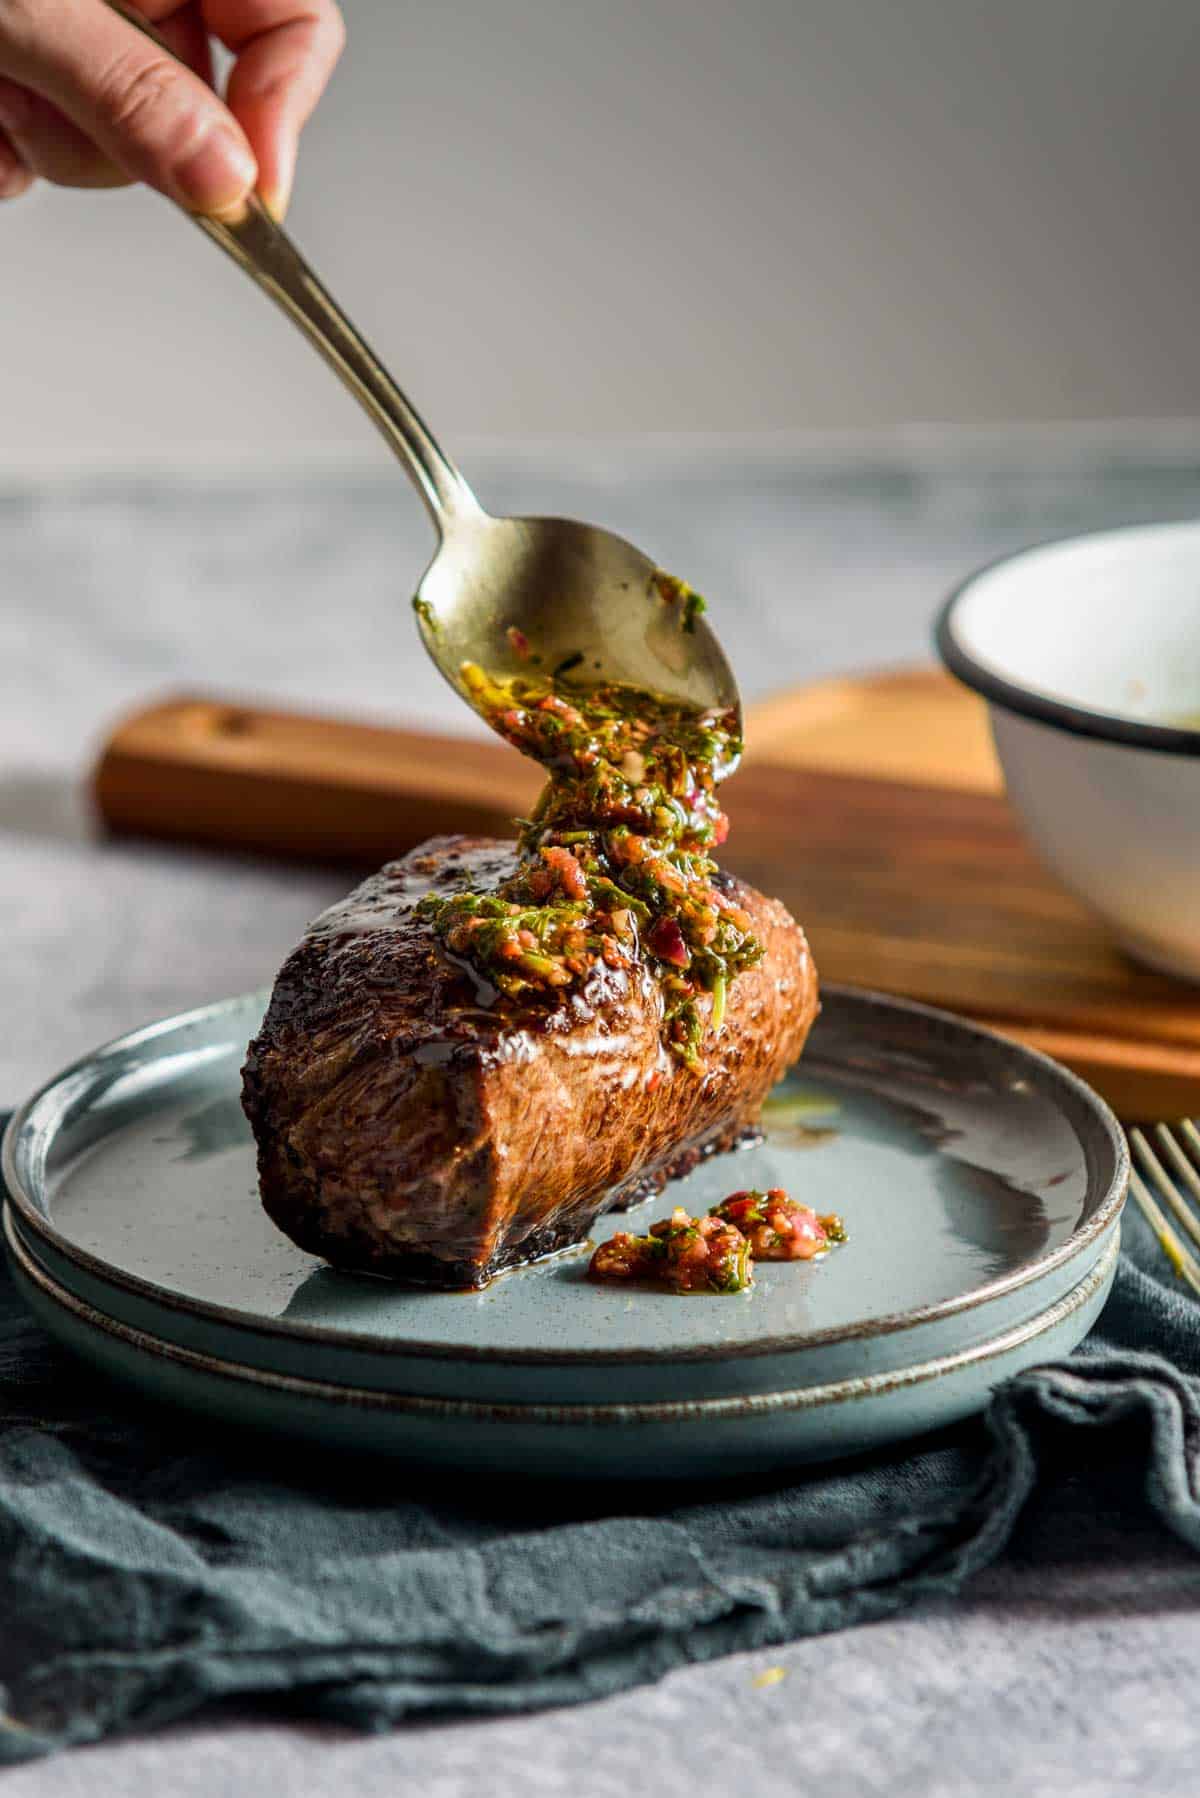 green chimichurri sauce being pours over a steak